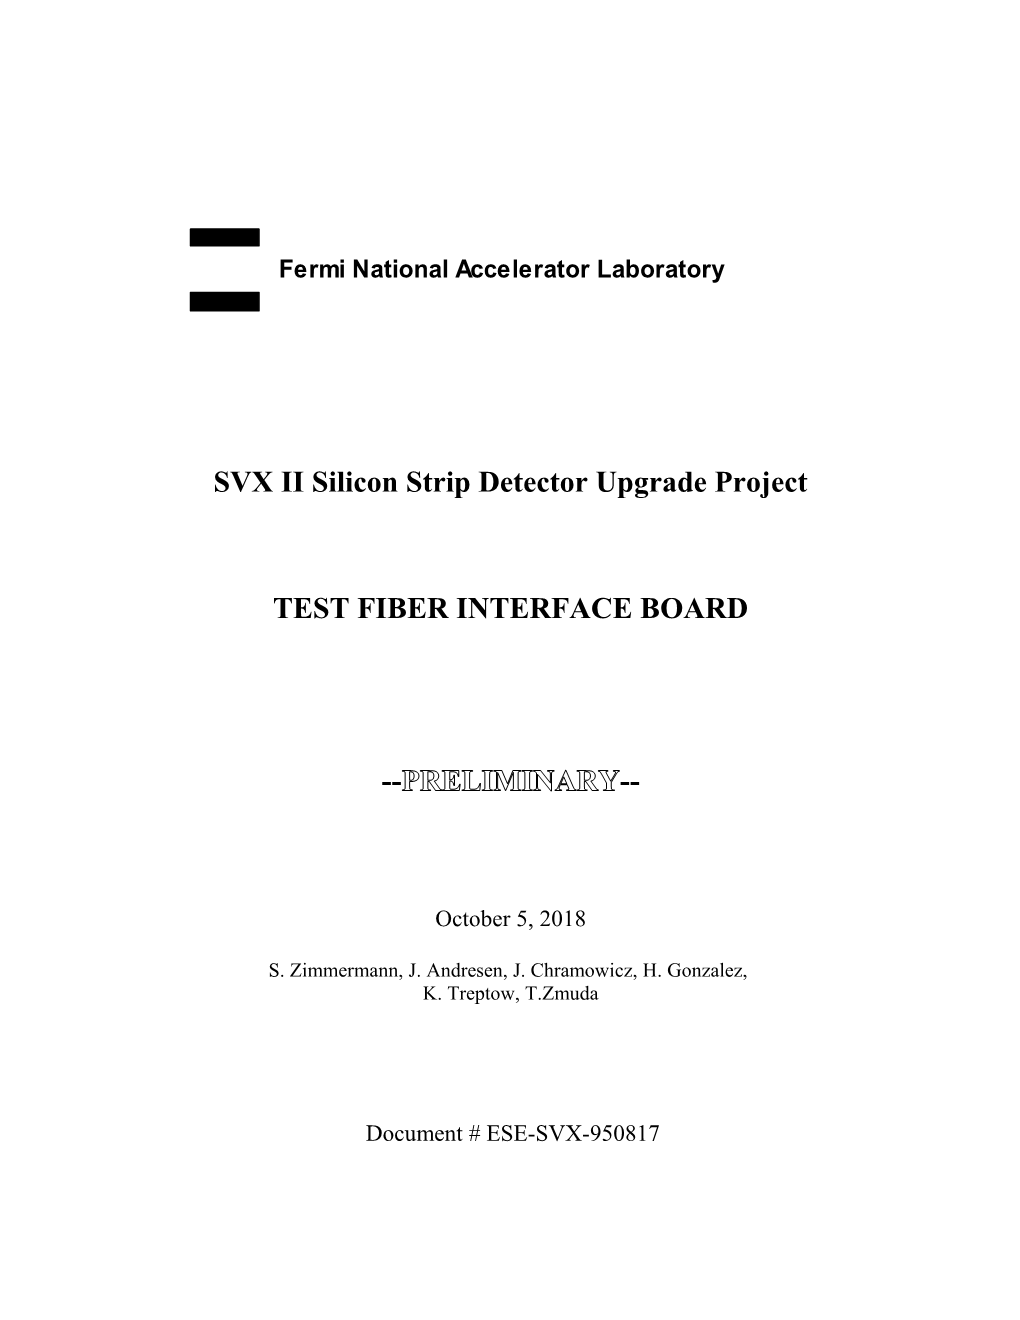 SVX II Silicon Strip Detector Upgrade Project